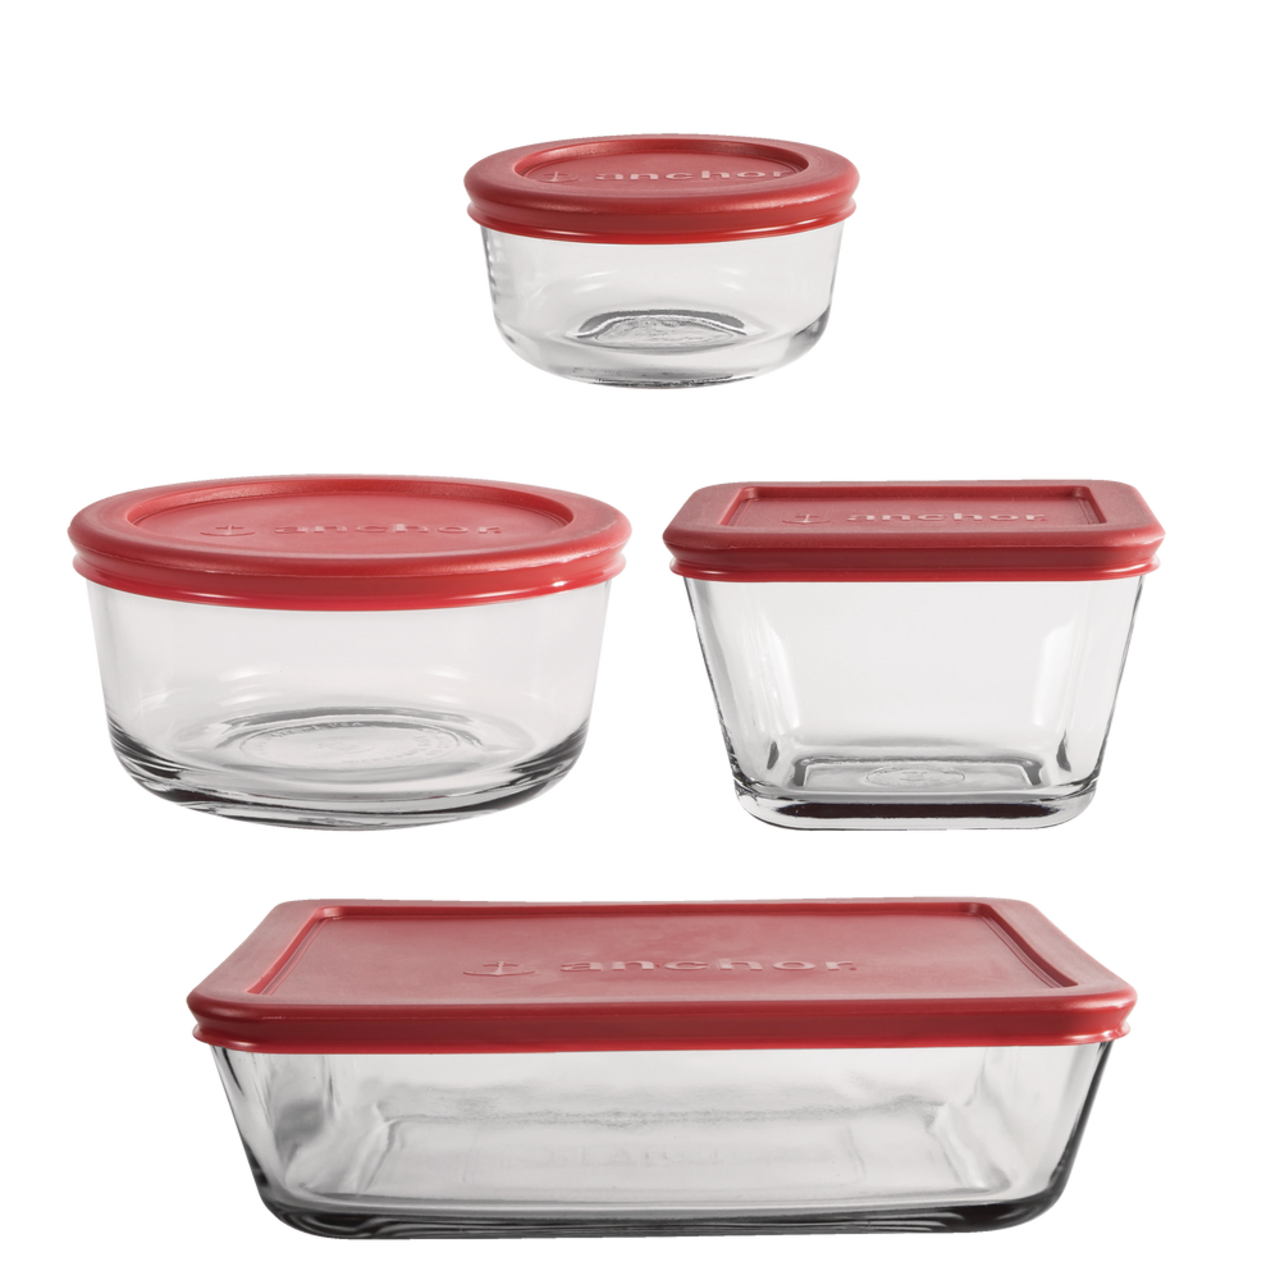 https://media-www.canadiantire.ca/product/living/kitchen/bakeware-baking-prep/0423707/8-piece-glass-storage-set-650112a8-abec-4108-9ad6-423fd90518d2.png?imdensity=1&imwidth=640&impolicy=mZoom